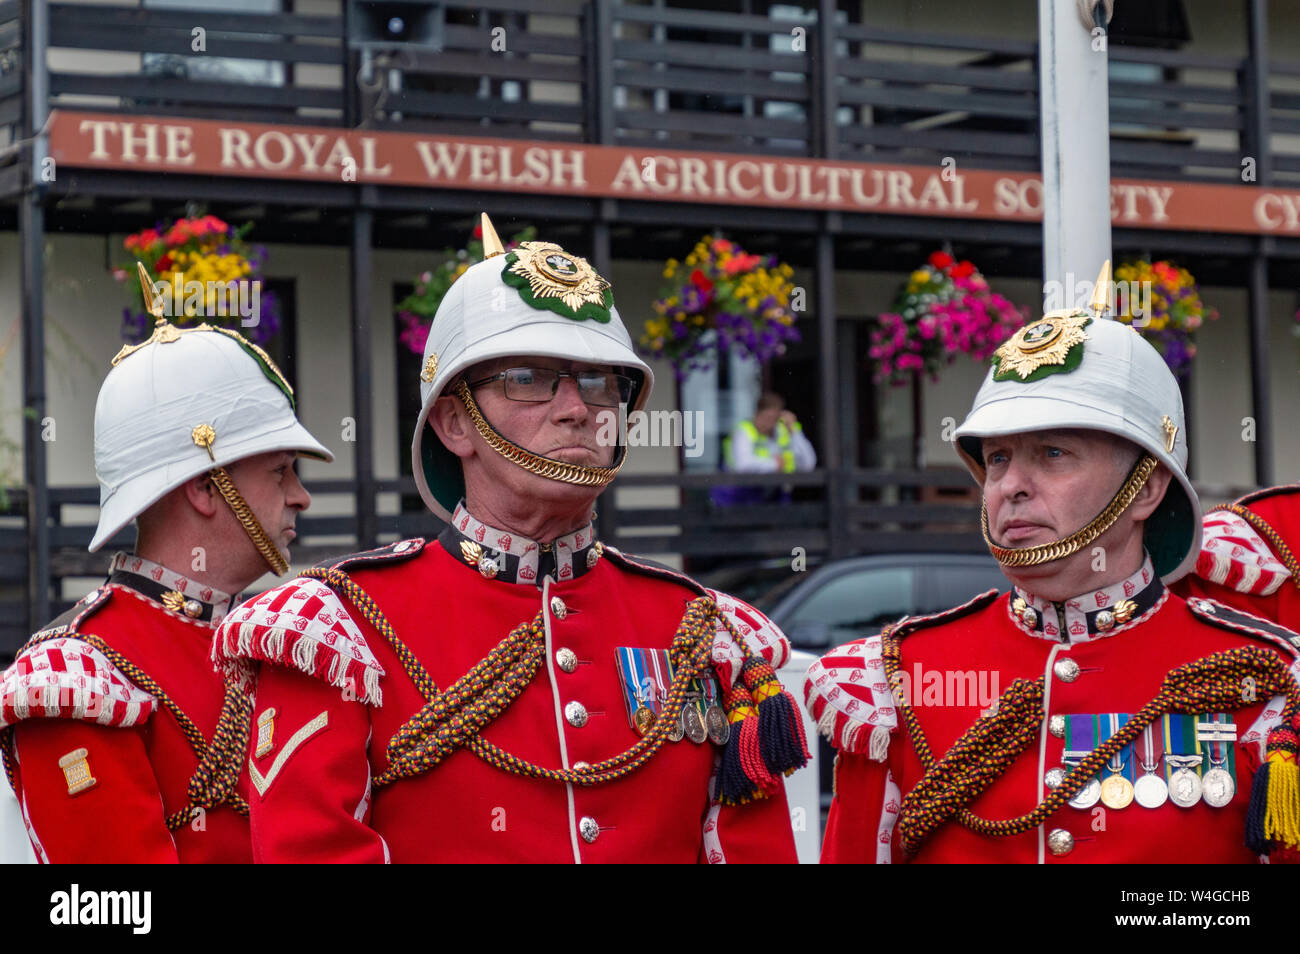 Old soldiers of the Welsh Regiment at the Royal Welsh Show in Llanelwedd, Builth Wells. Part of the royal visit of King Goodwill of the Zulu Nation for the 140th anniversary of Rorke's Drift during the Anglo Zulu War. Stock Photo